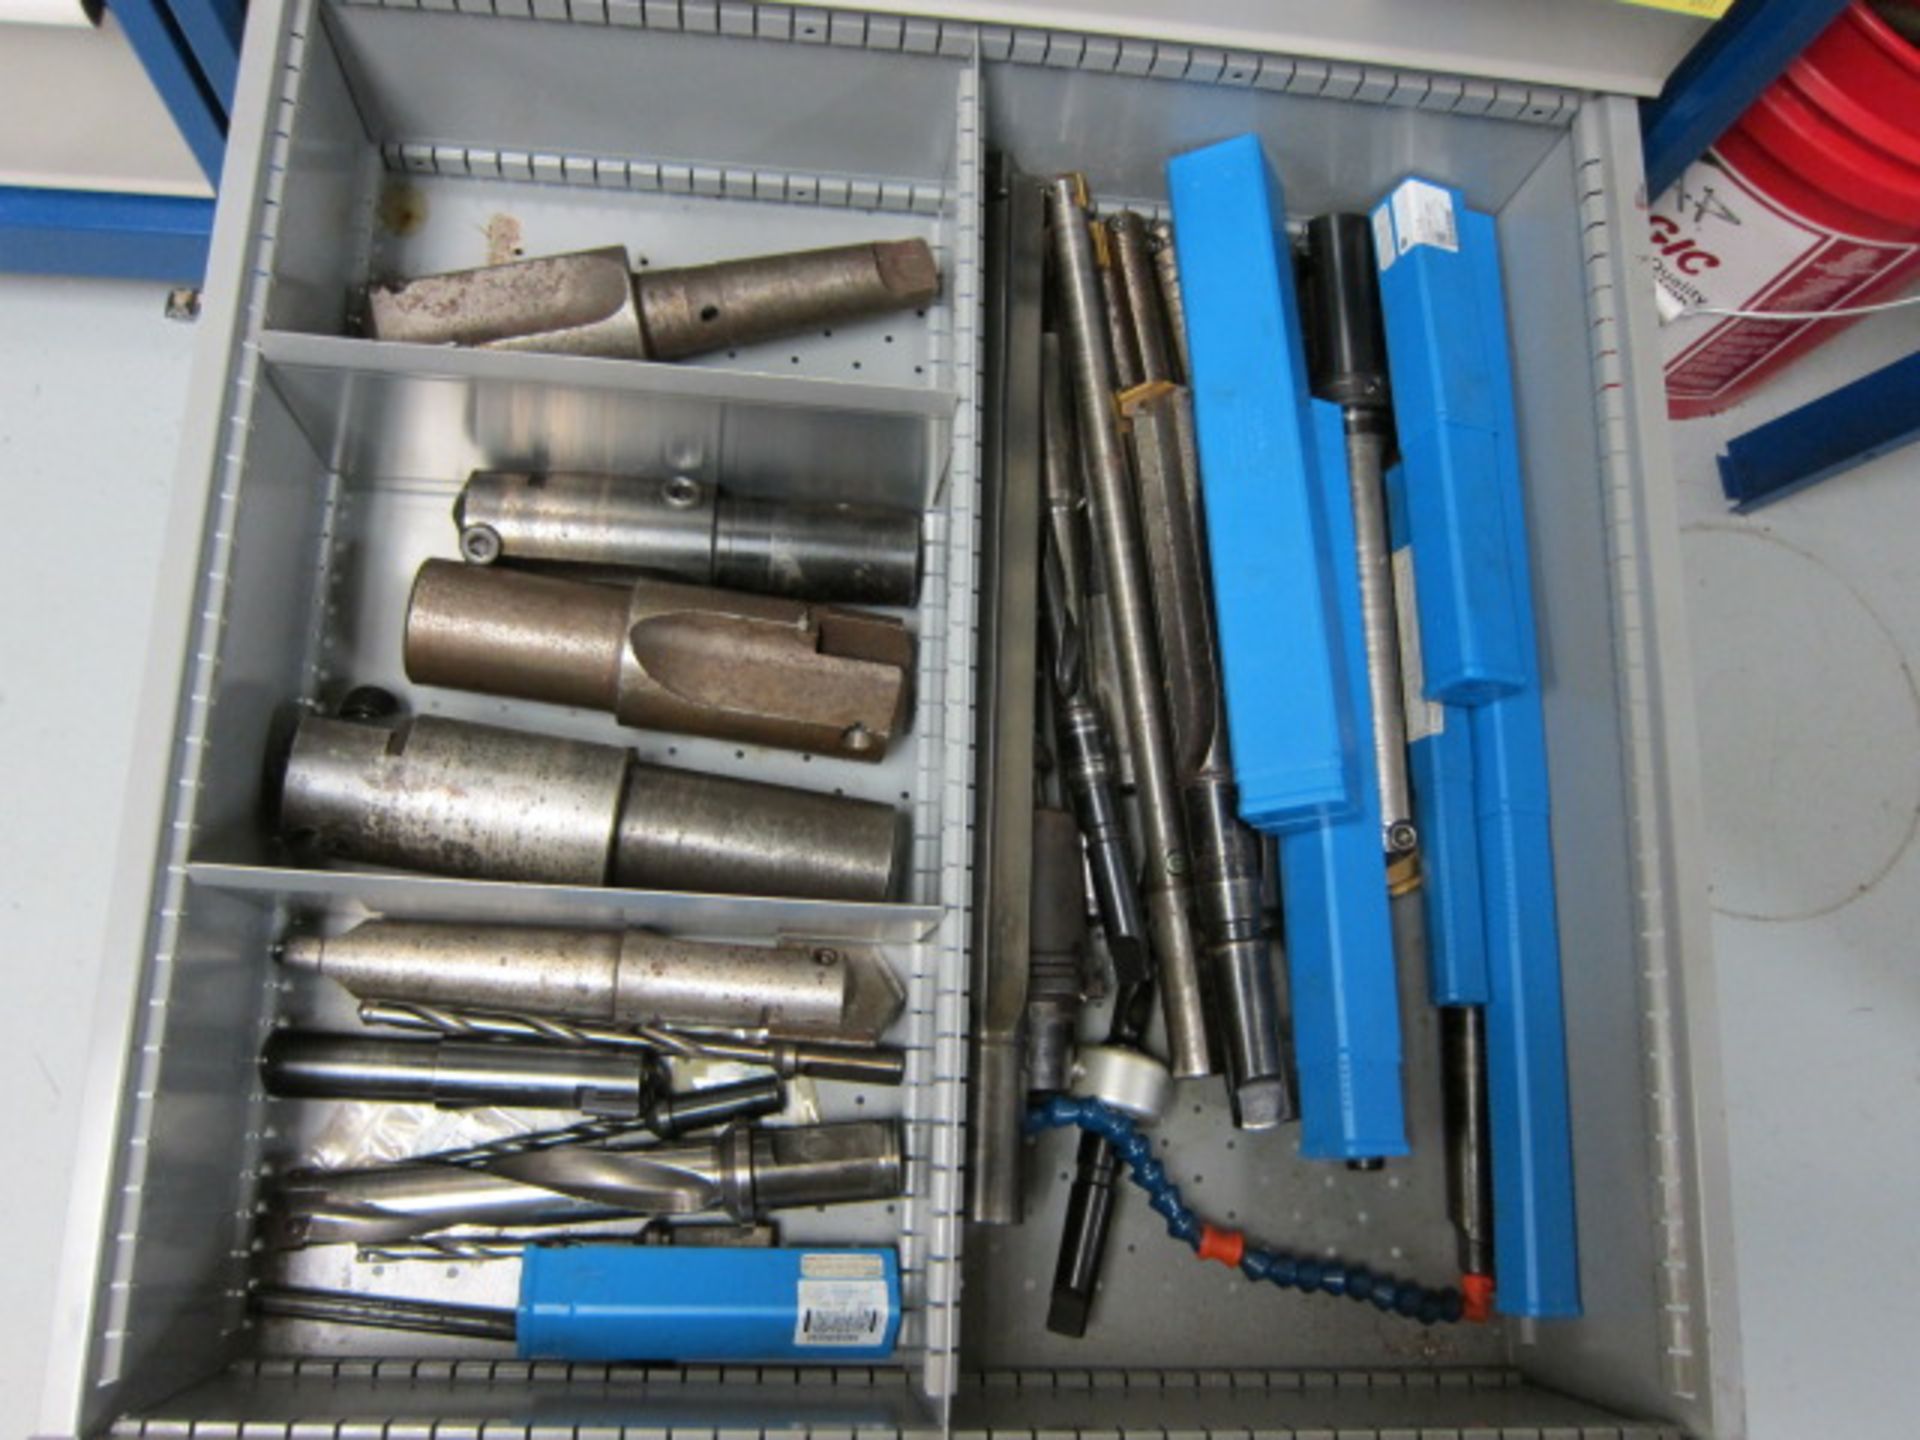 LOT OF SPADE DRILLS, assorted (in one drawer)